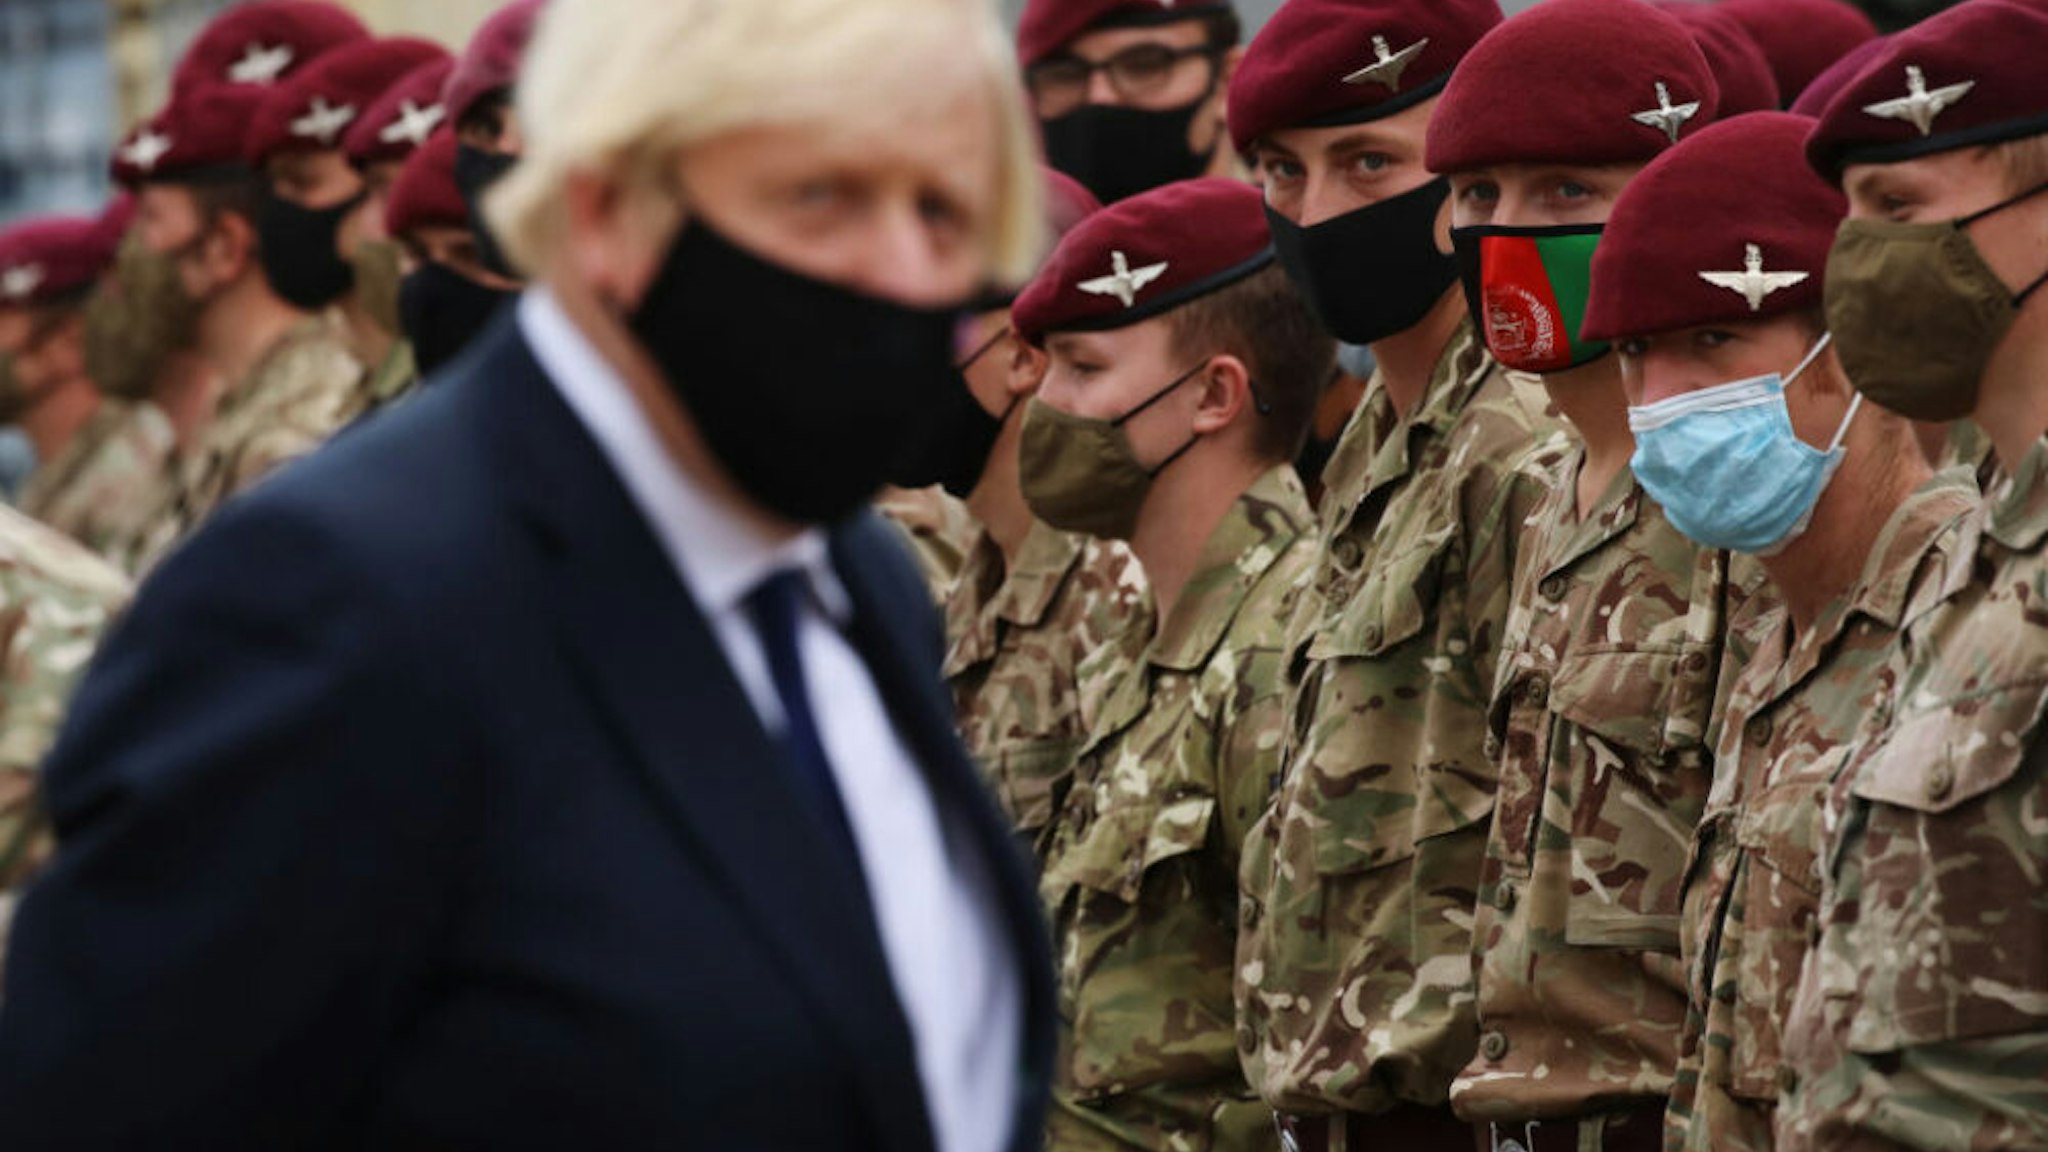 COLCHESTER, ENGLAND - SEPTEMBER 02: A soldier wearing a protective face mask depicting the flag of Afghanistan looks on as UK prime minister Boris Johnson meets with military personnel who worked on the Afghan evacuation during a visit to Merville Barracks on September 2, 2021 in Colchester, United Kingdom. Members of the 16th Air Assault Brigade worked with US forces to secure the Kabul airport for last month's evacuation operation.